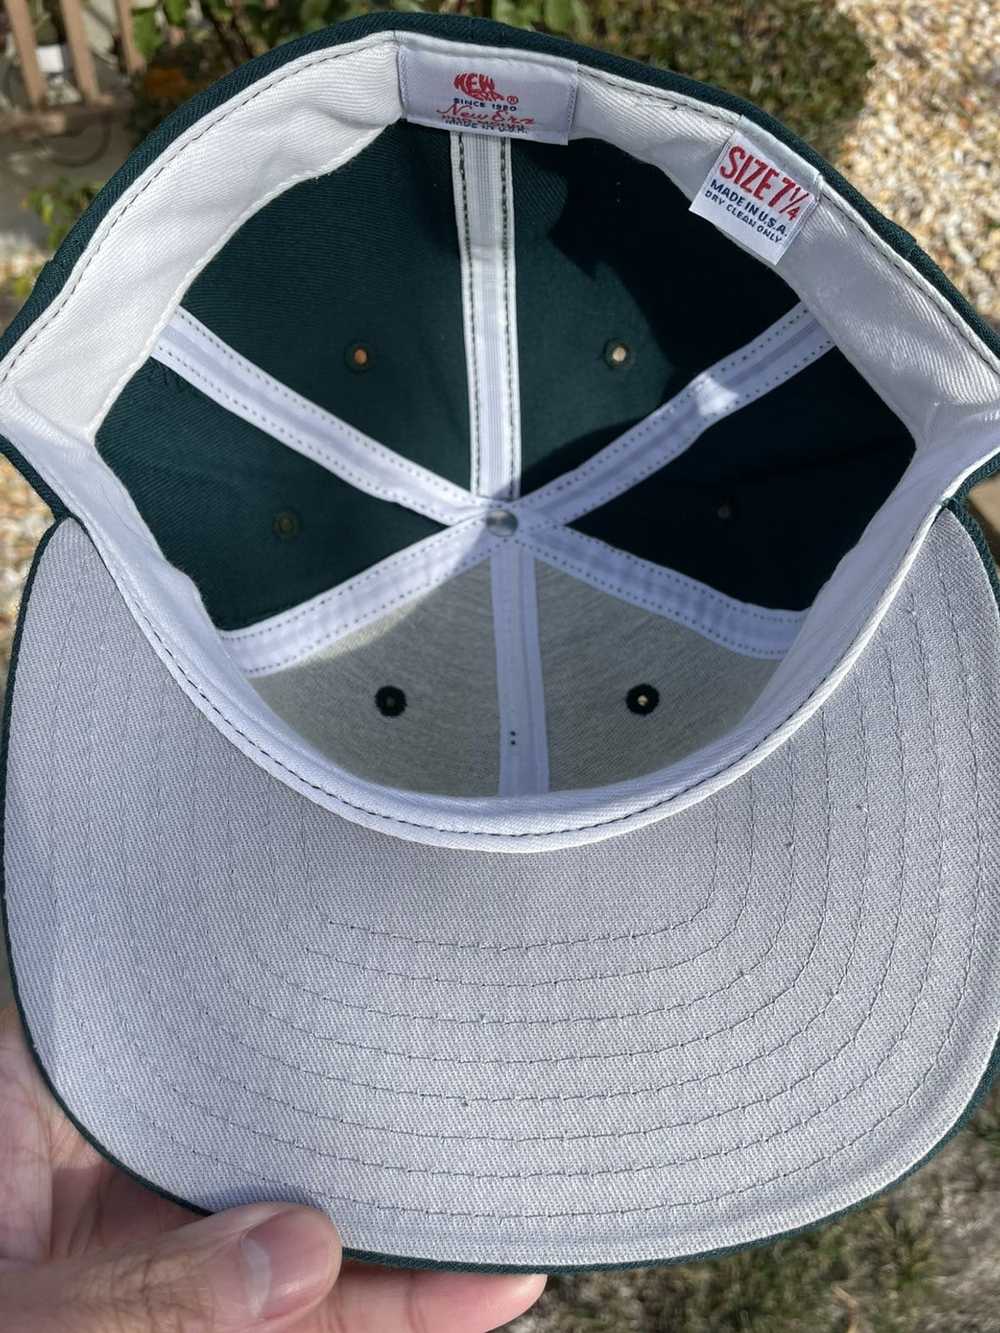 New Era Wagner College New Era fitted hat 7 1/4 - image 3